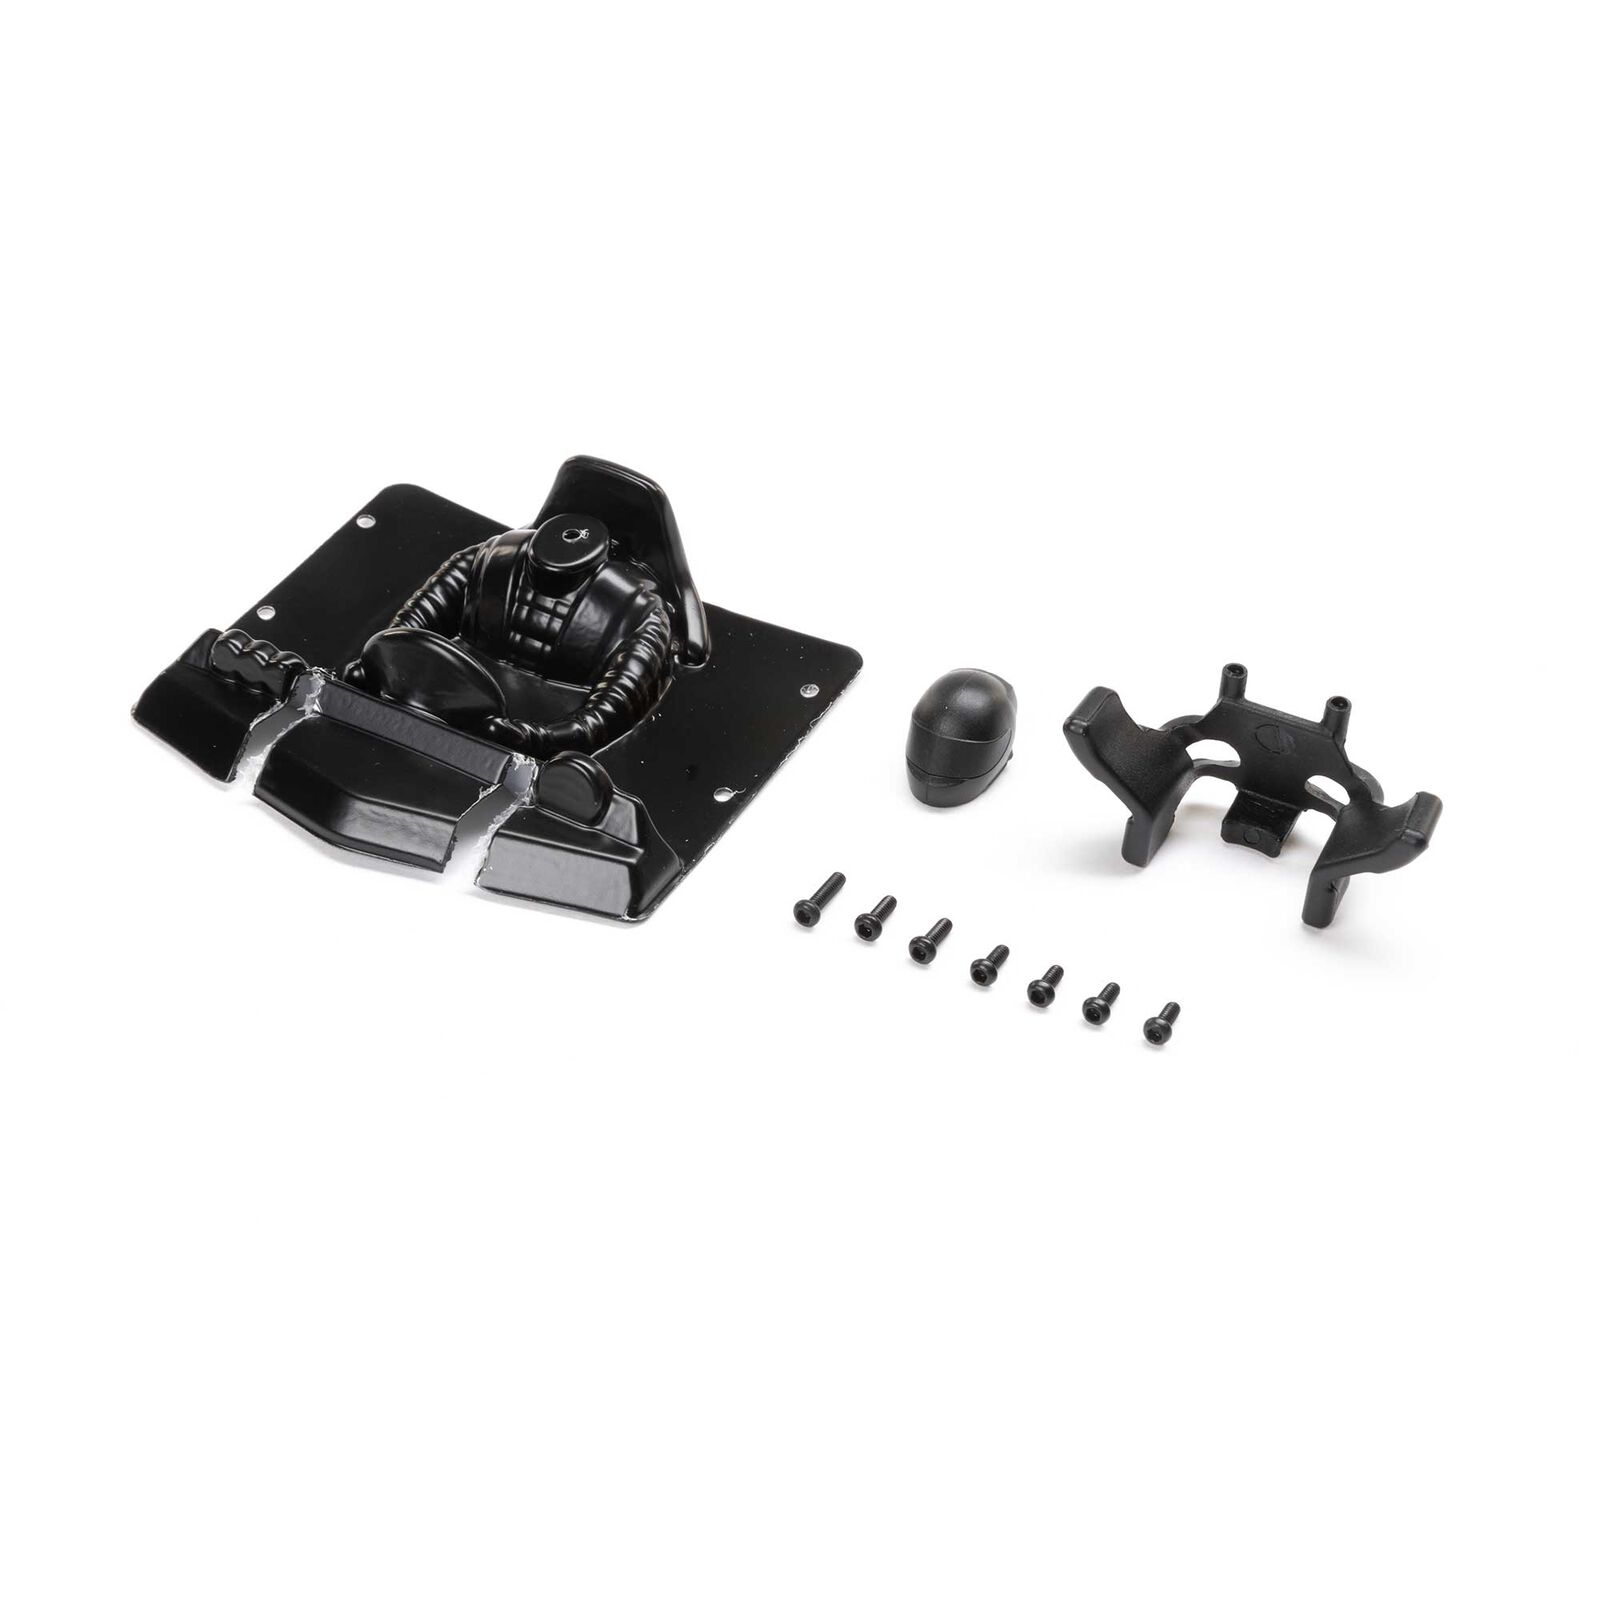 Driver Insert and Safety Seat: Mini LMT